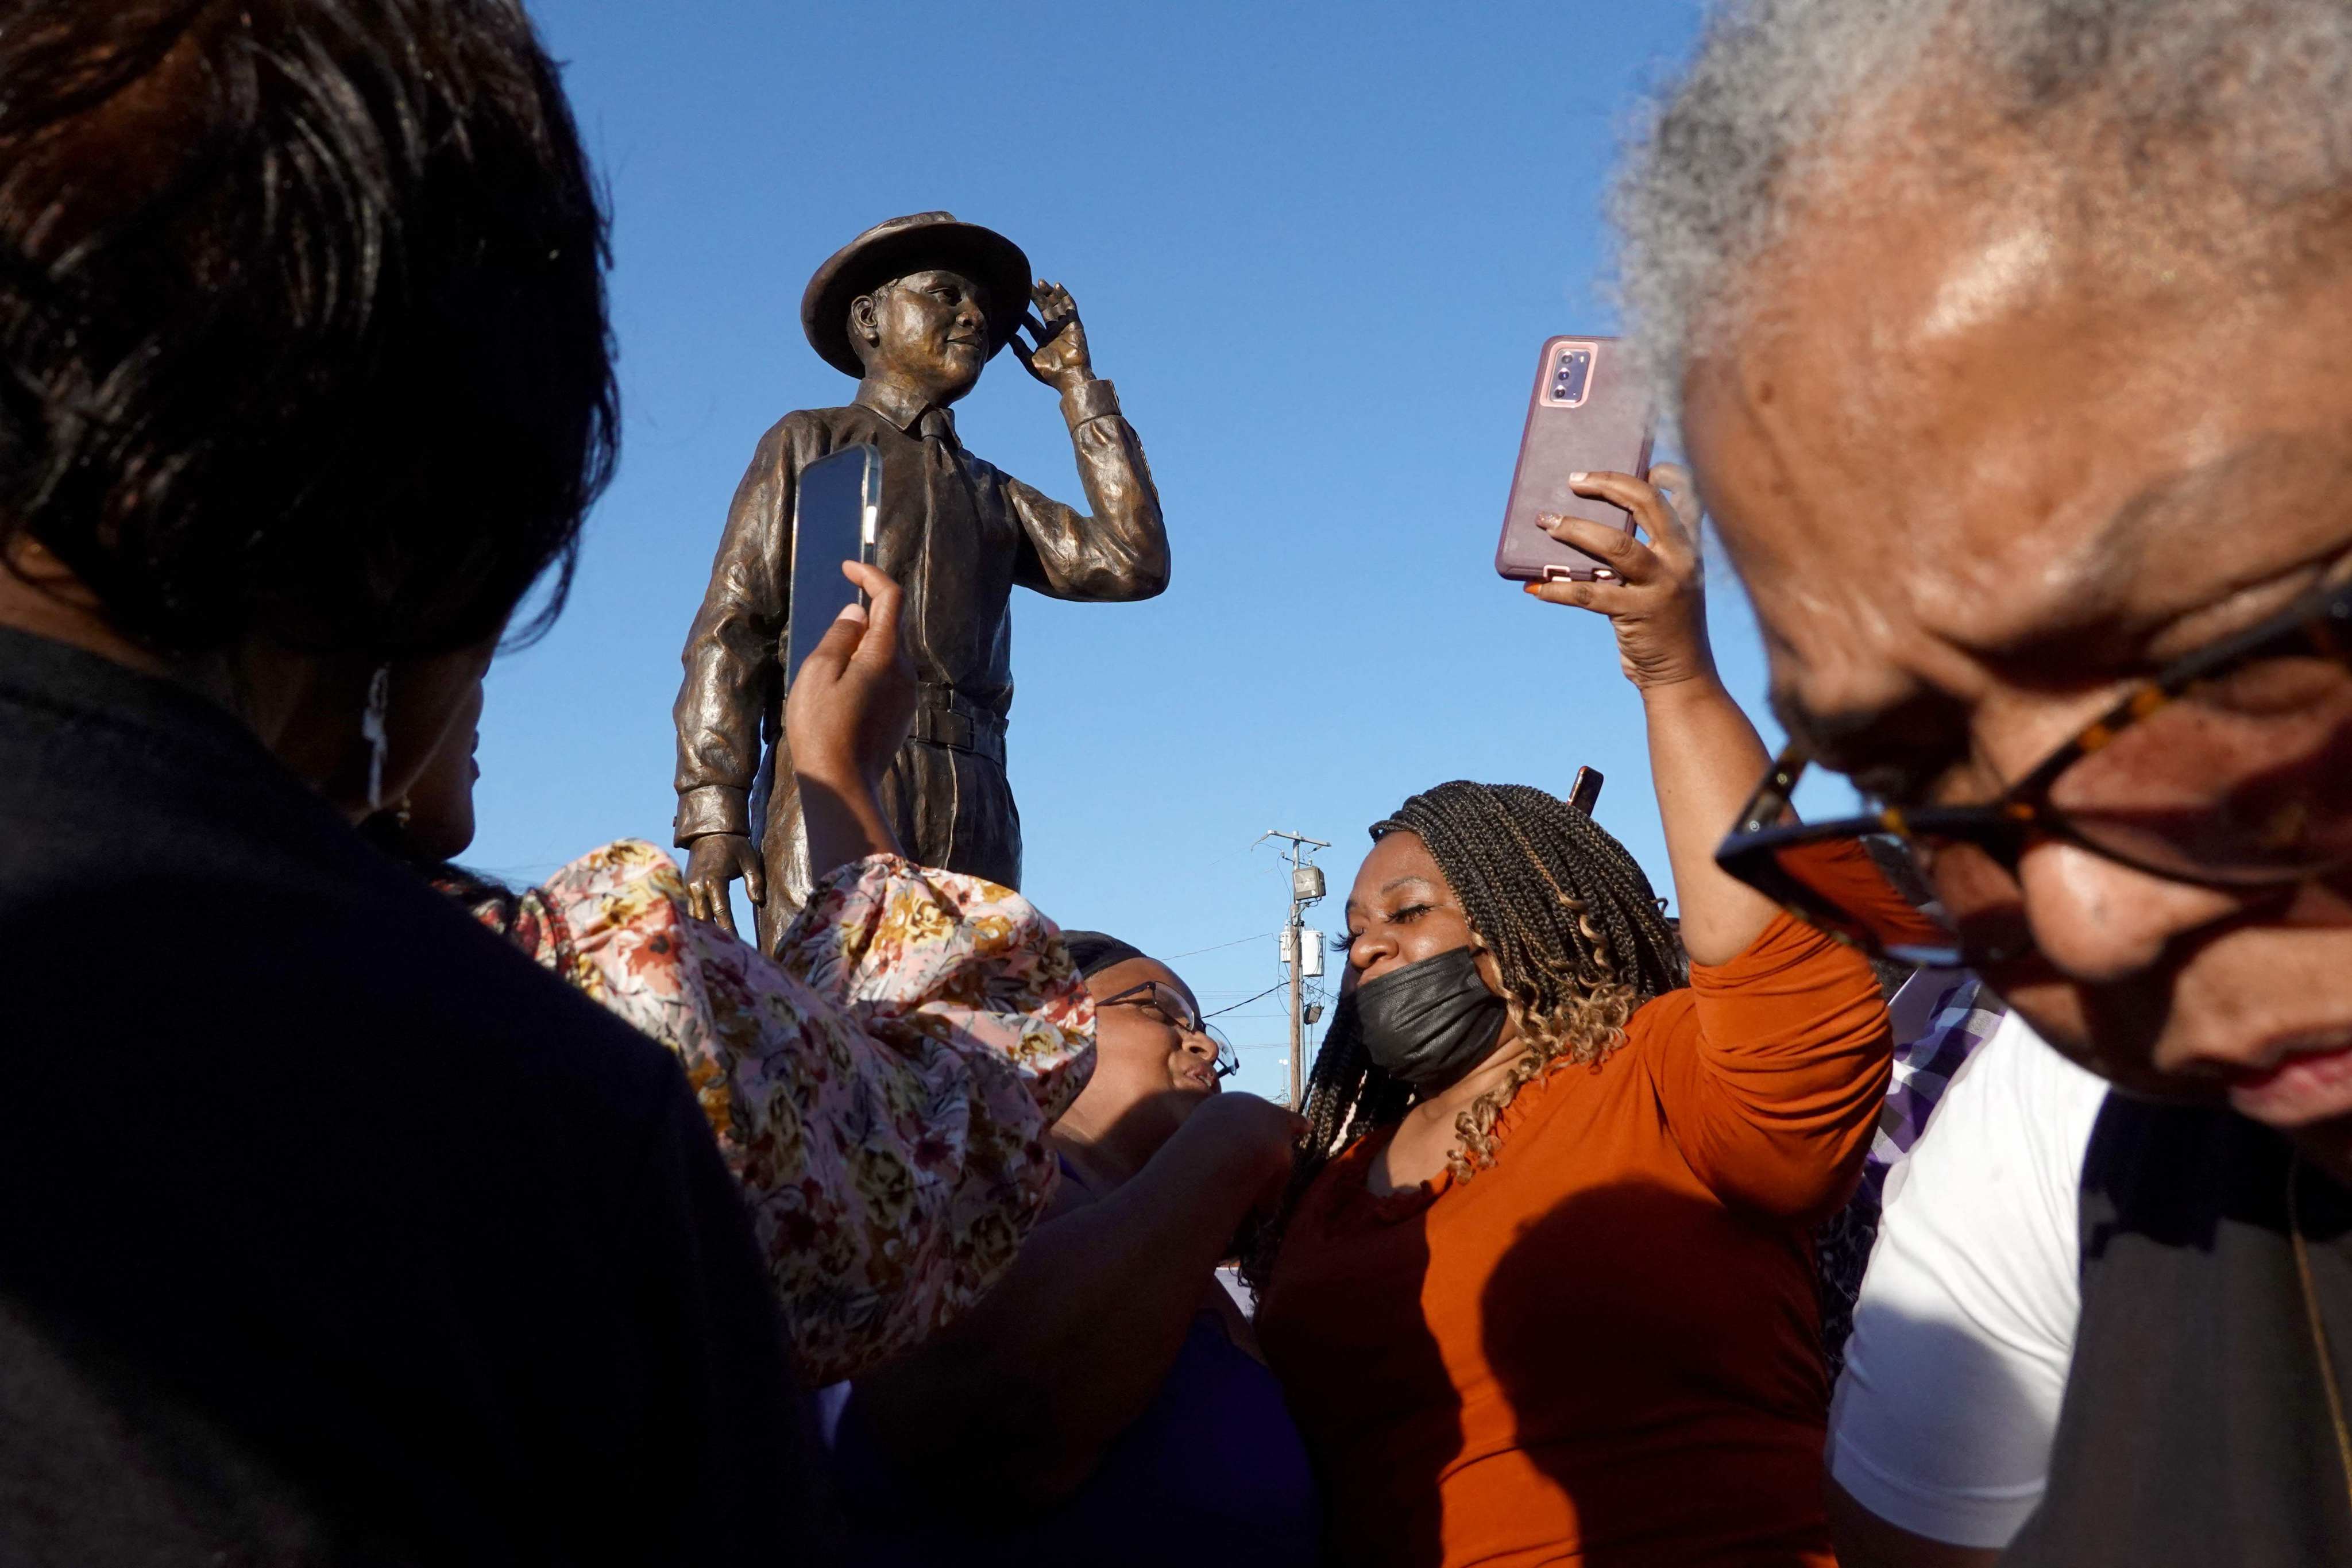 A statue of Emmett Till is unveiled in October 2022 in Greenwood, Mississippi. Photo: AFP